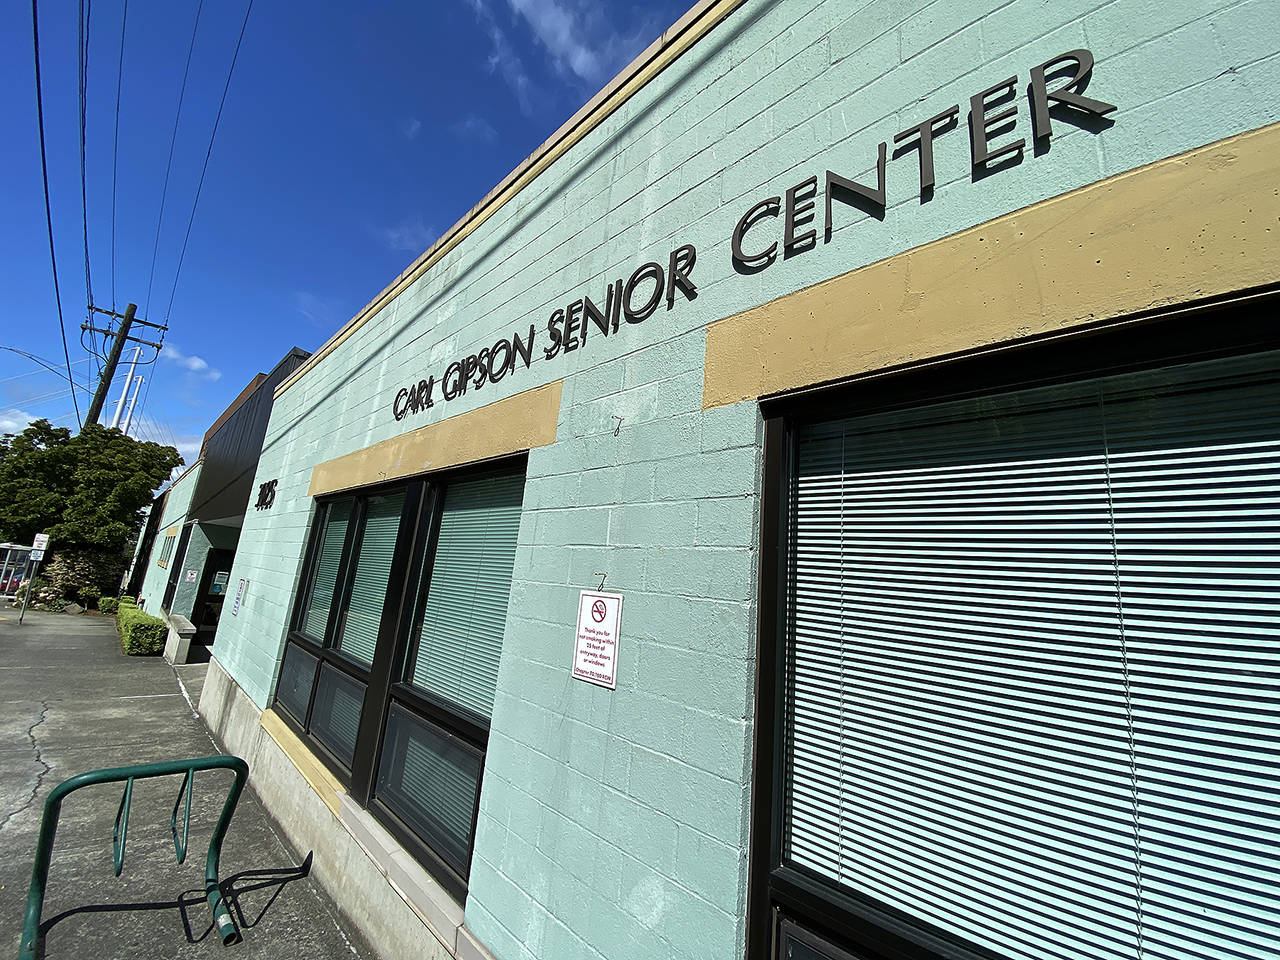 The Carl Gipson Senior Center has been shuttered through the year. (Sue Misao / The Herald)